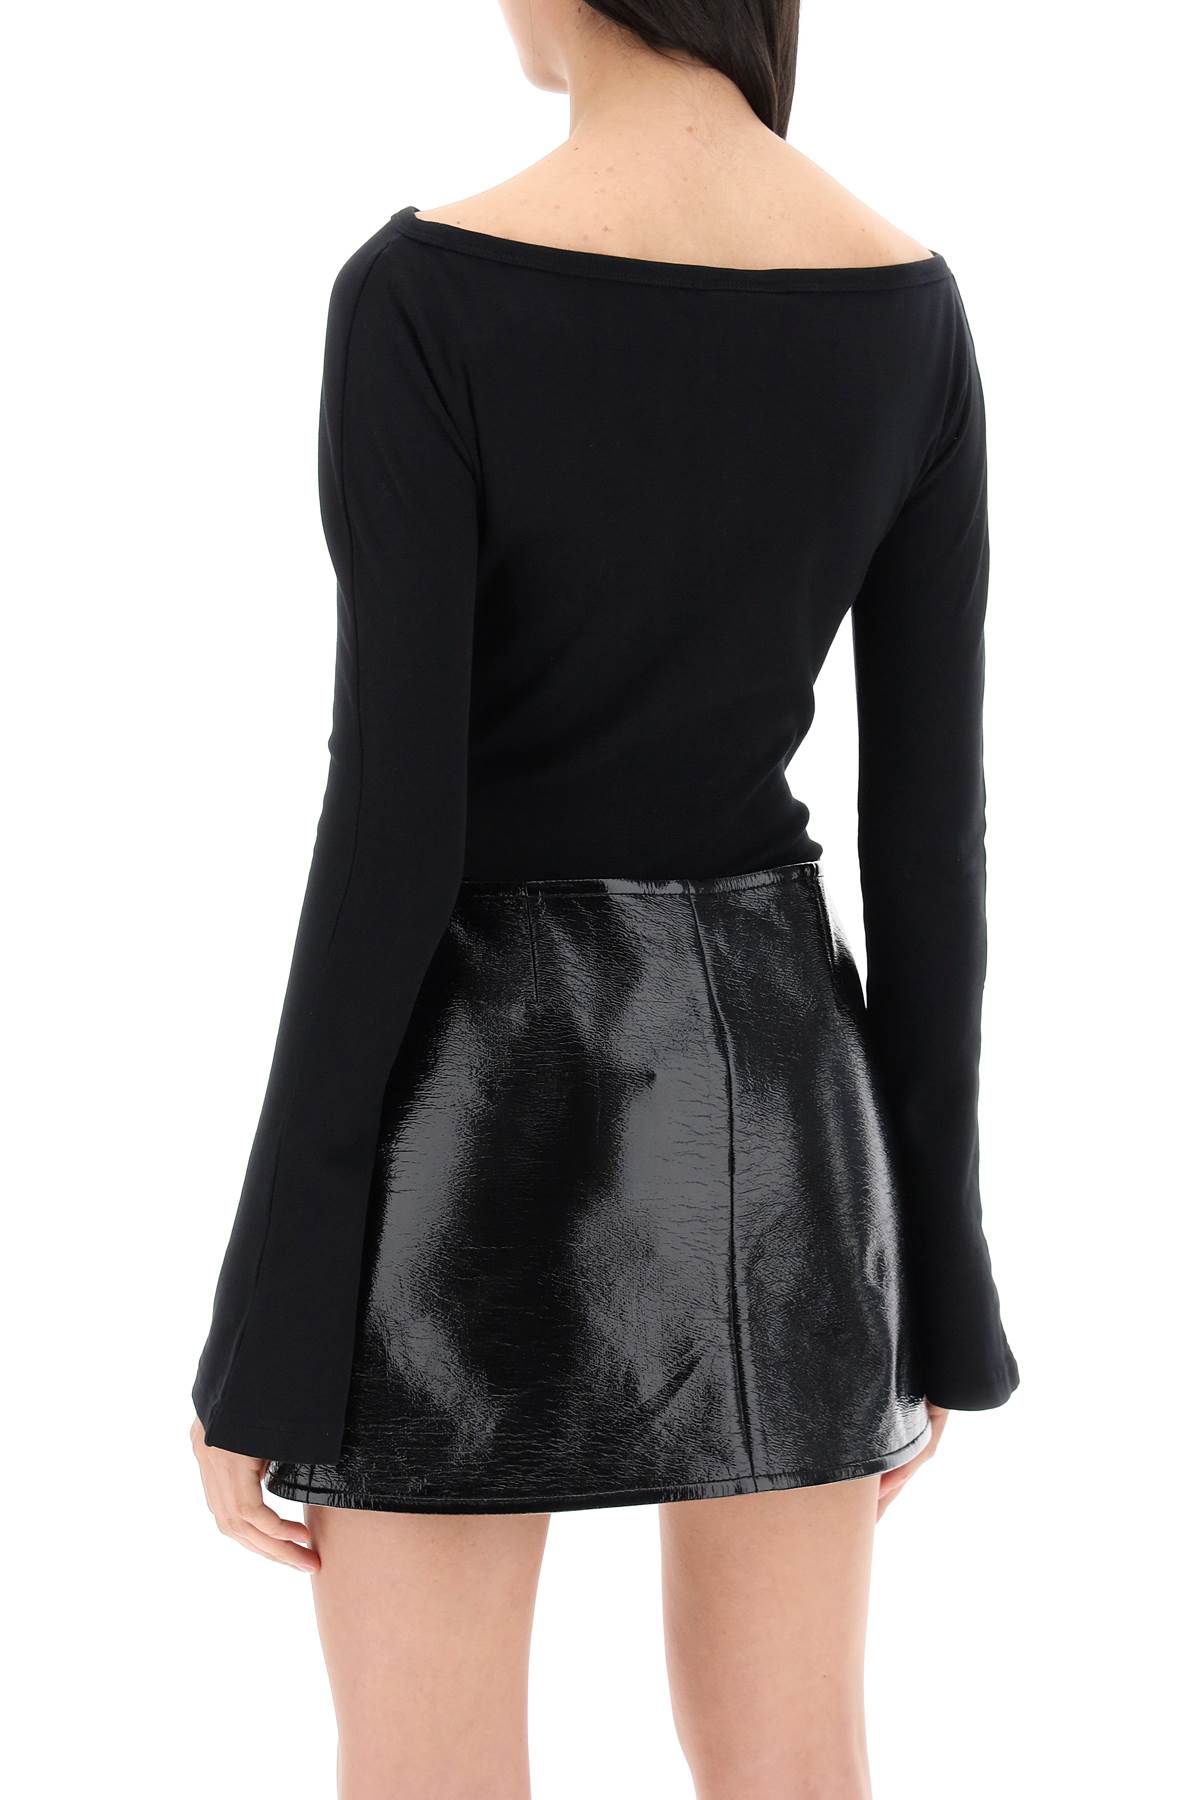 Courreges Replace With Double Quotejersey Body With Cut Out   Black